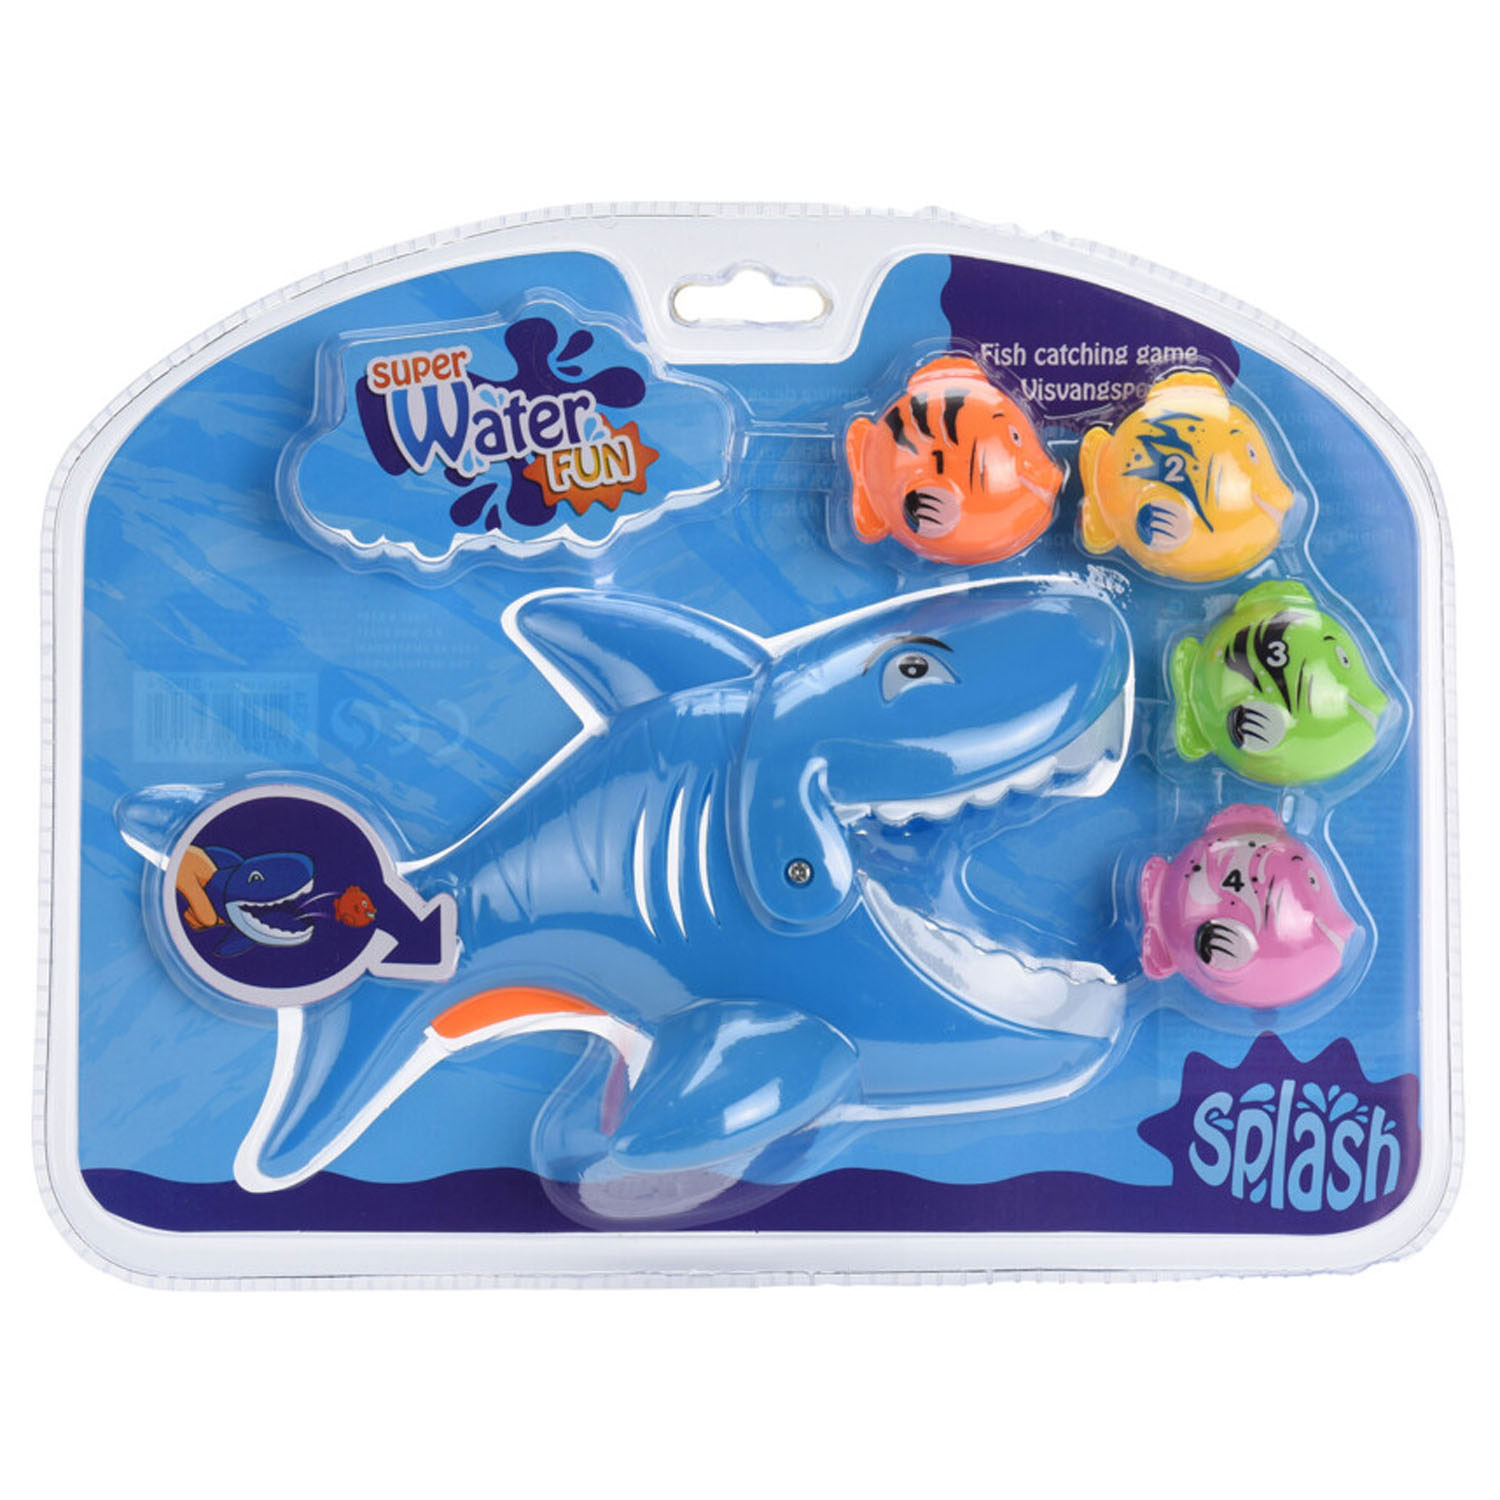 Shark fishing game with 4 fish